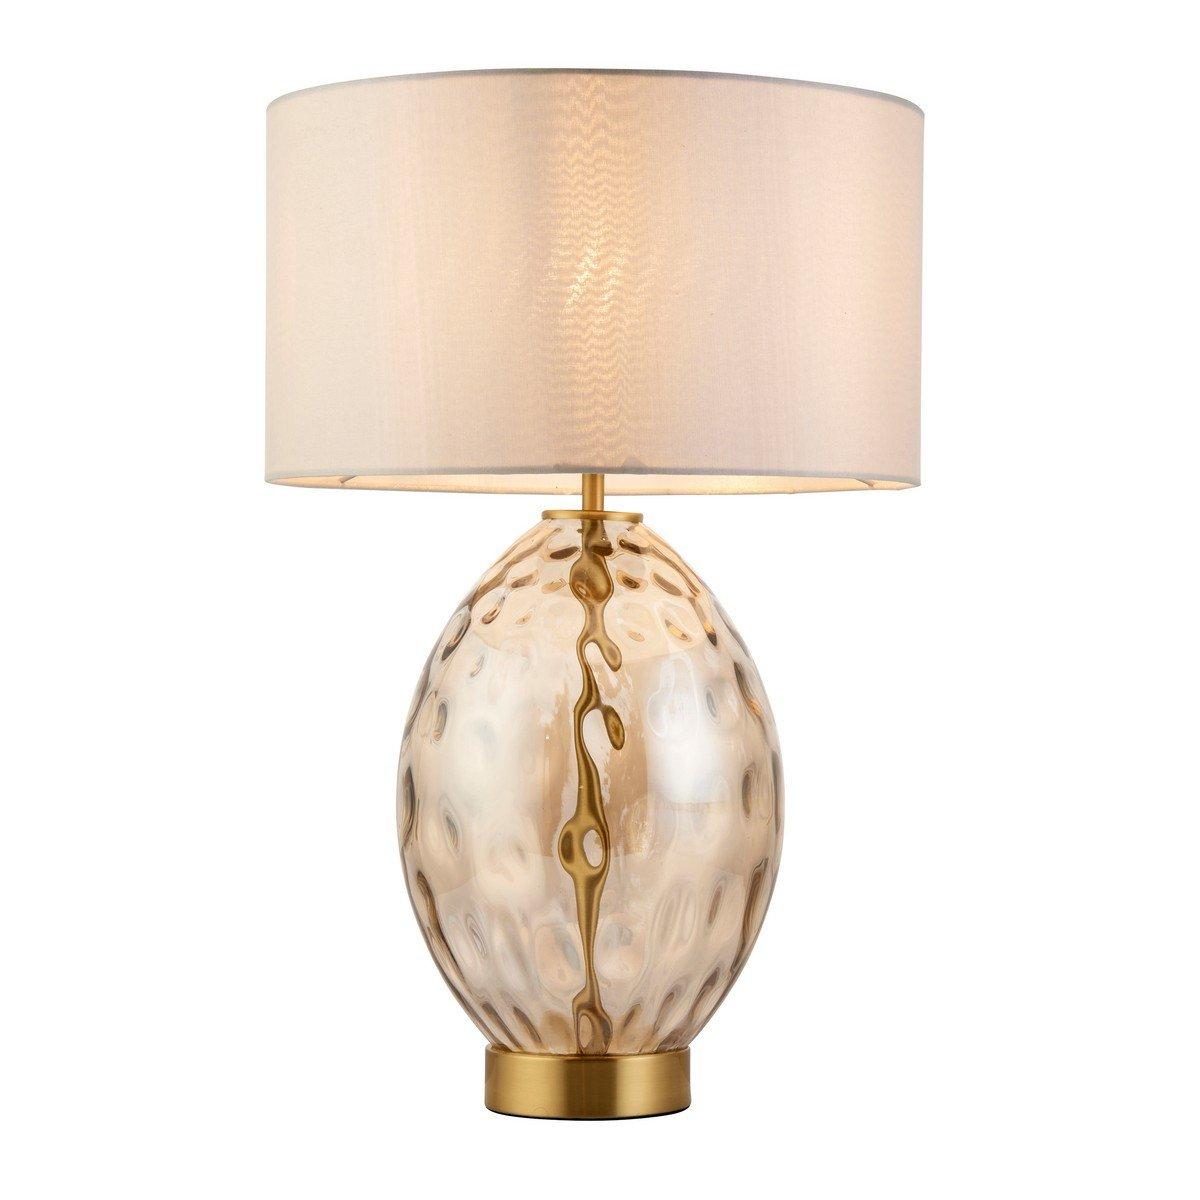 Barletta Base & Shade Table Lamp Champagne Lustre Glass Satin Brass Plate With Vintage White Fabric